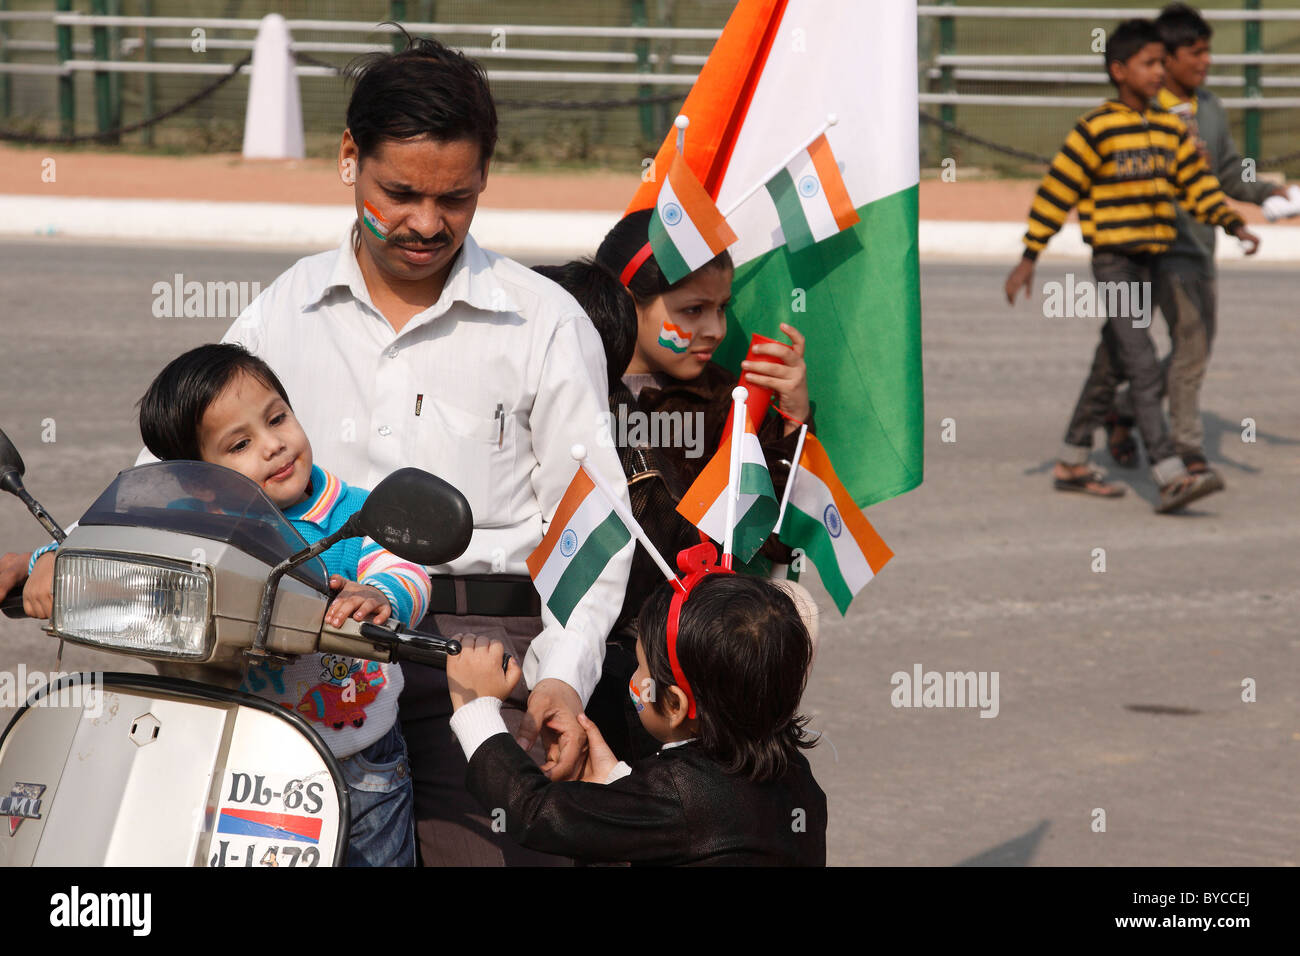 Family riding two-wheeler scooter kids holding Indian tricolor national flag Republic Day 26th January Rajpath New Delhi India Stock Photo